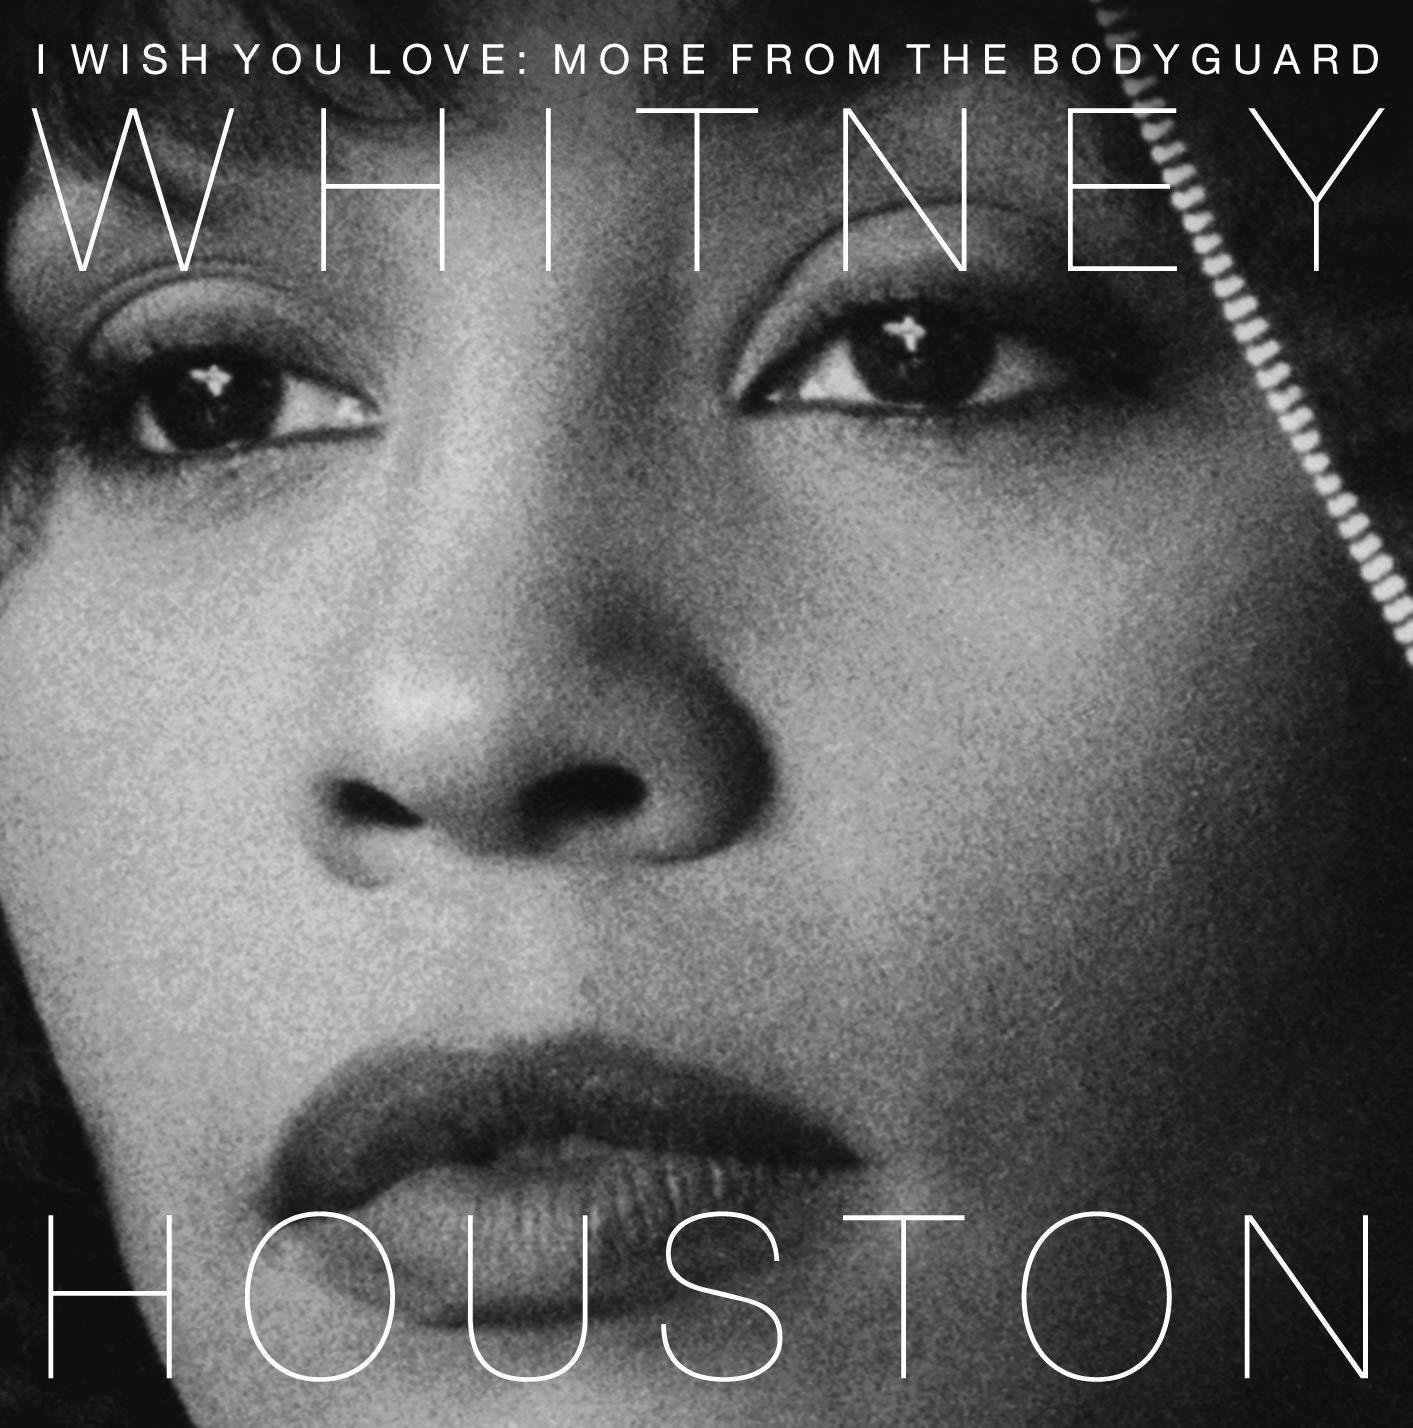 LP Whitney Houston - I Wish You Love: More From the Bodyguard (Anniversary Edition) (Purple Coloured) (2 LP)